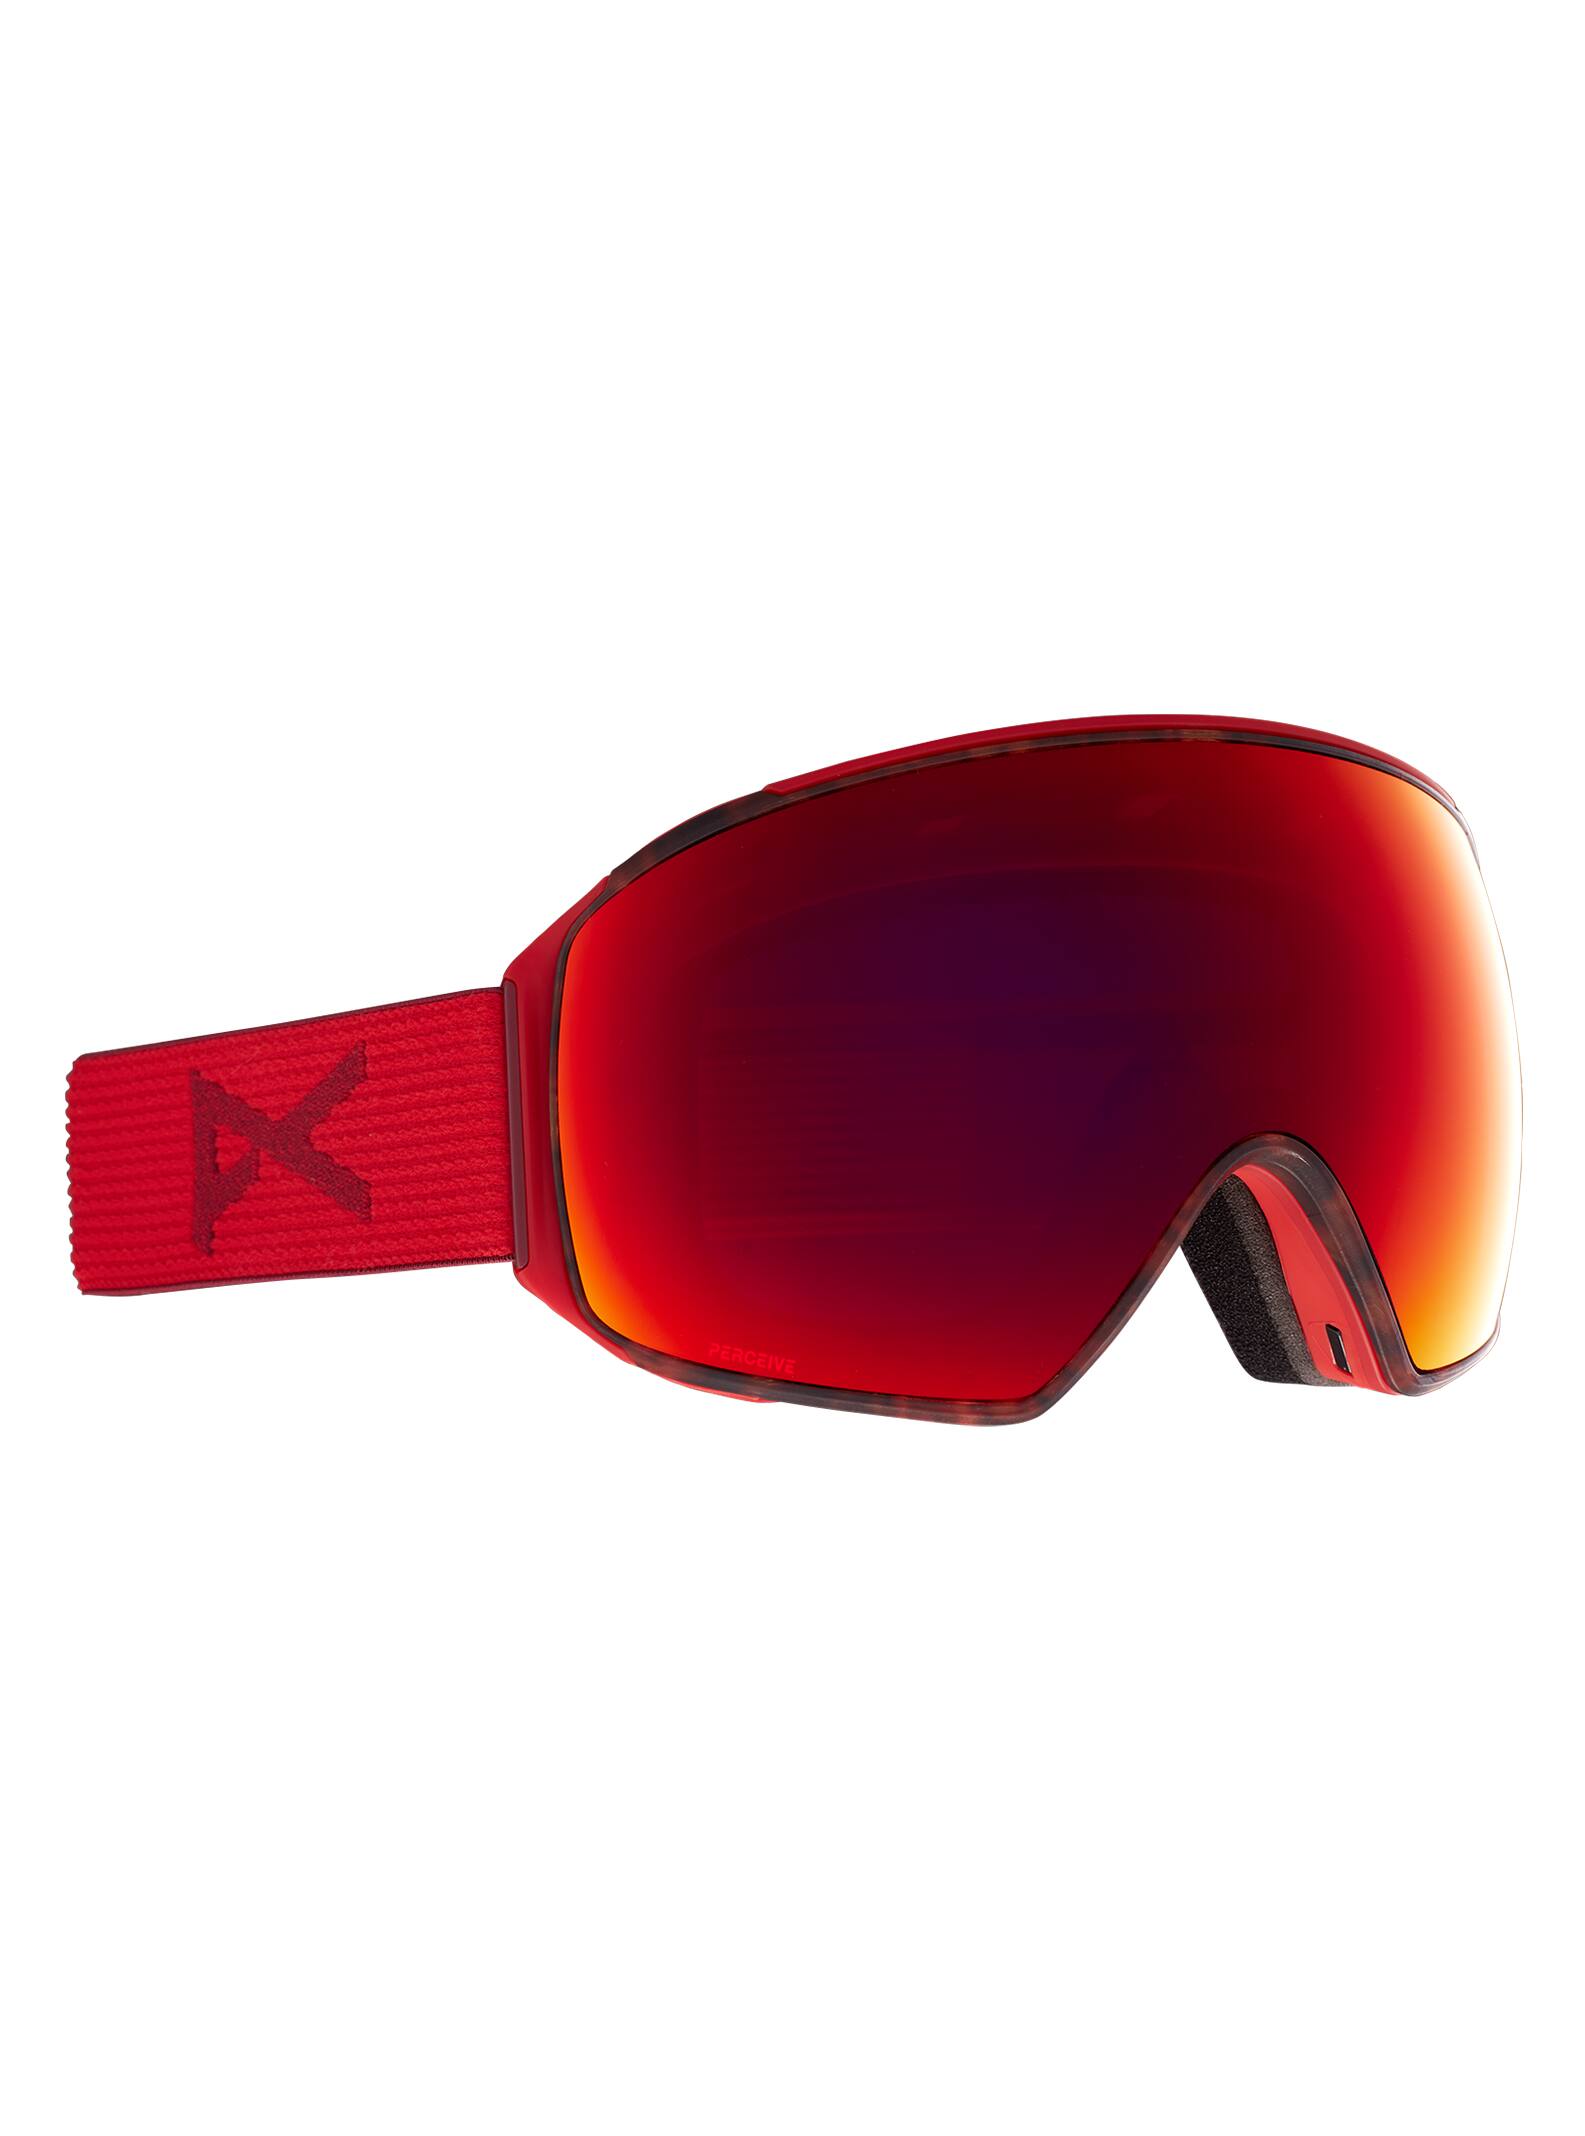 Anon Men's M3 Goggle with Spare Lens, Black   Perceive Sunny Red